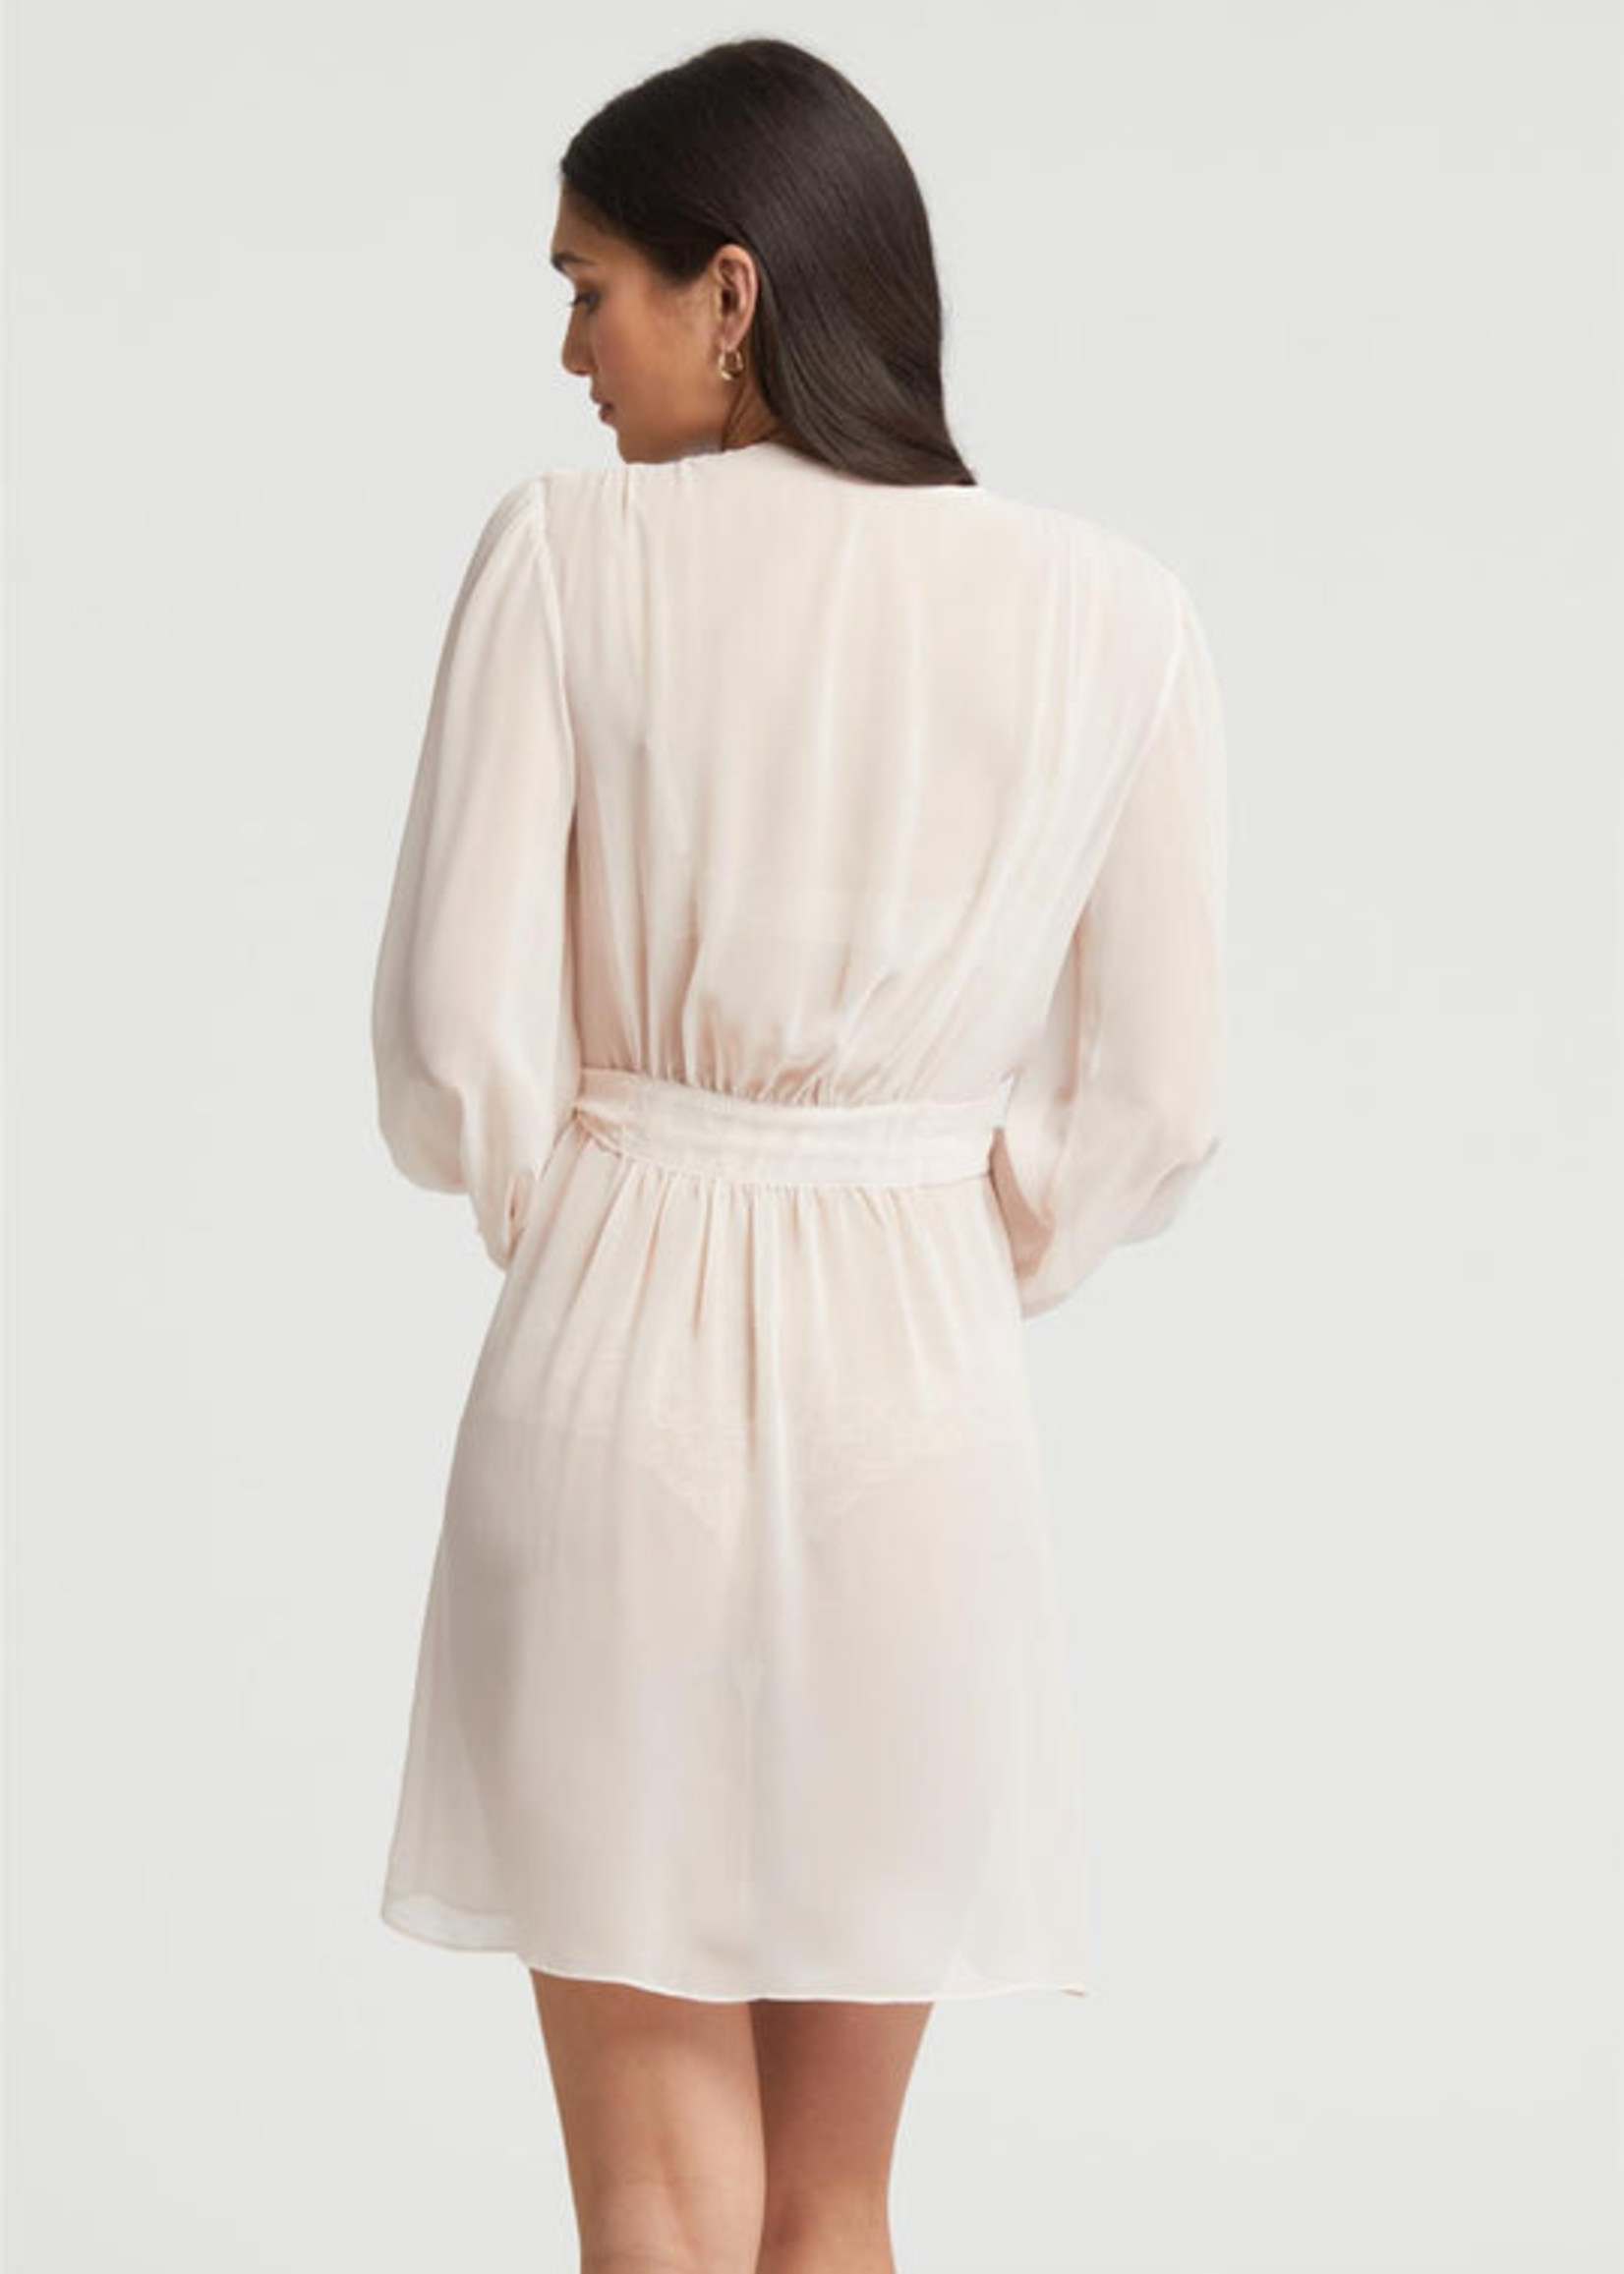 Rya Collection True Love Coverup - Blush